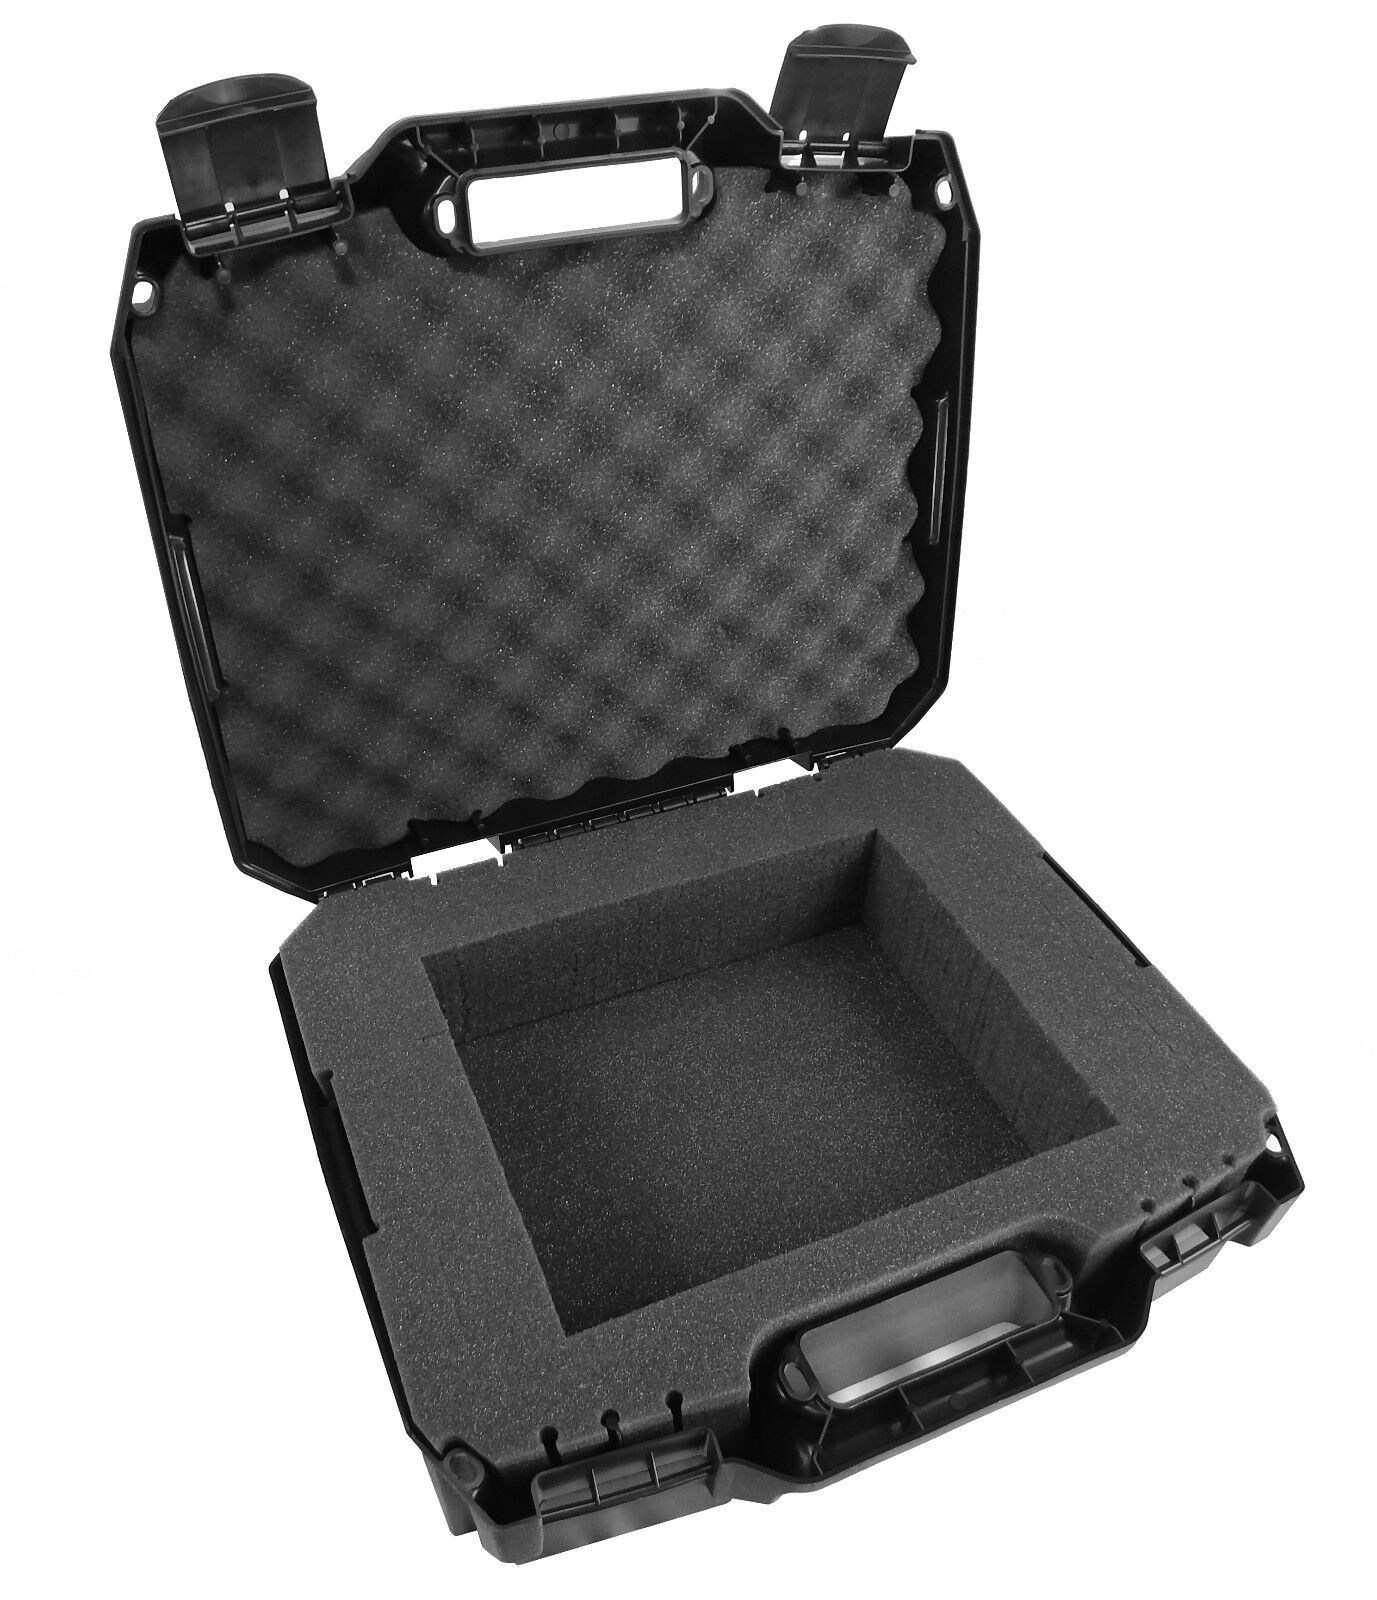 CM Padded Custom Projector Case fits Epson Pro EX9220 , EPSON EX9210 and More